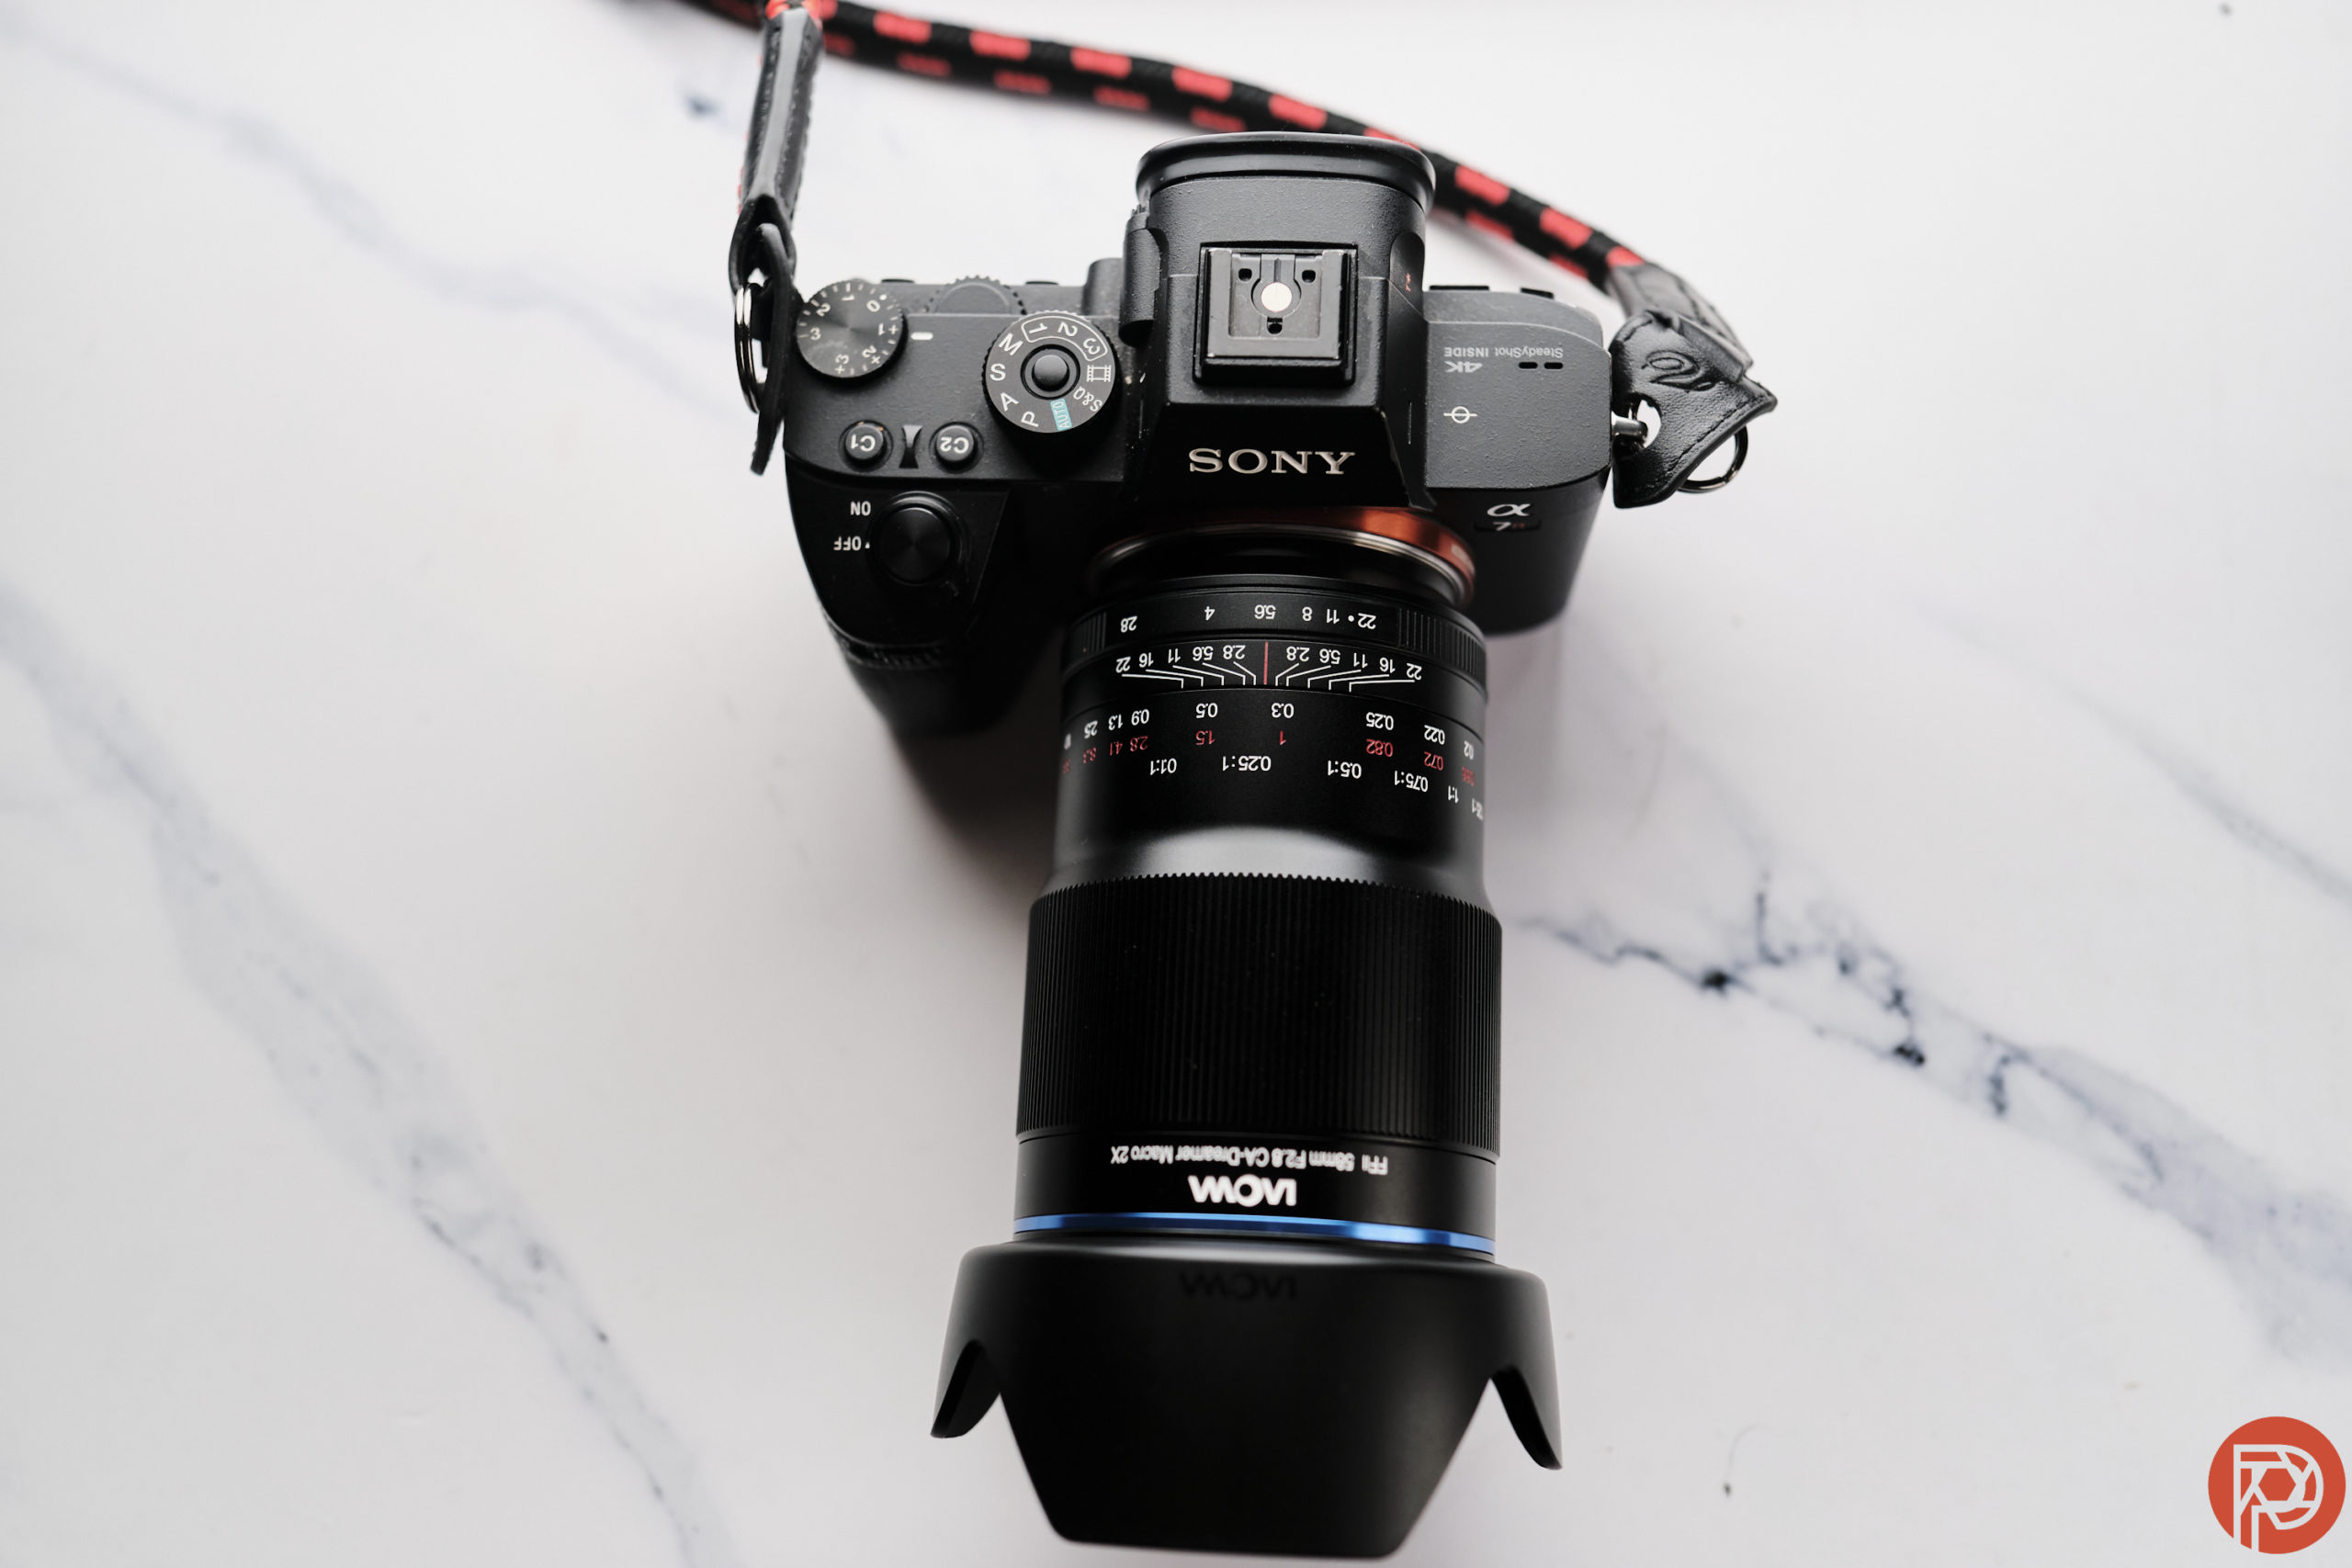 Chris Gampat The Phoblographer Laowa 58mm f2.8 product images review 21-500s400 1